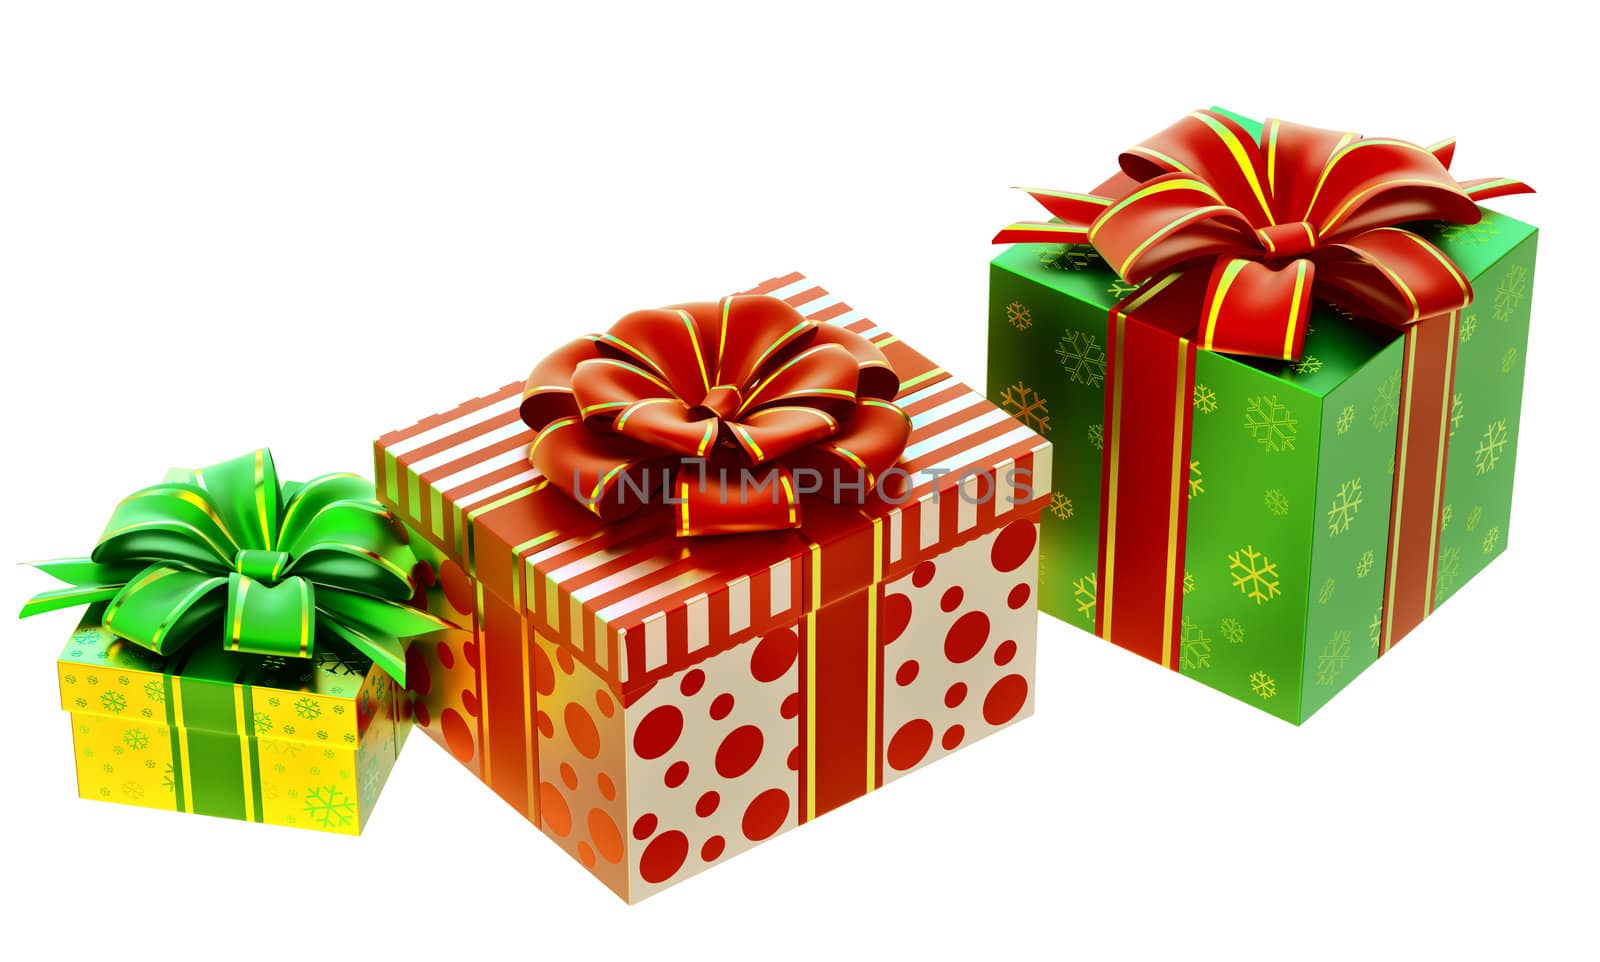 set of yellow, green and white boxes ornamented with the snowflakes and decorated by bows as gifts